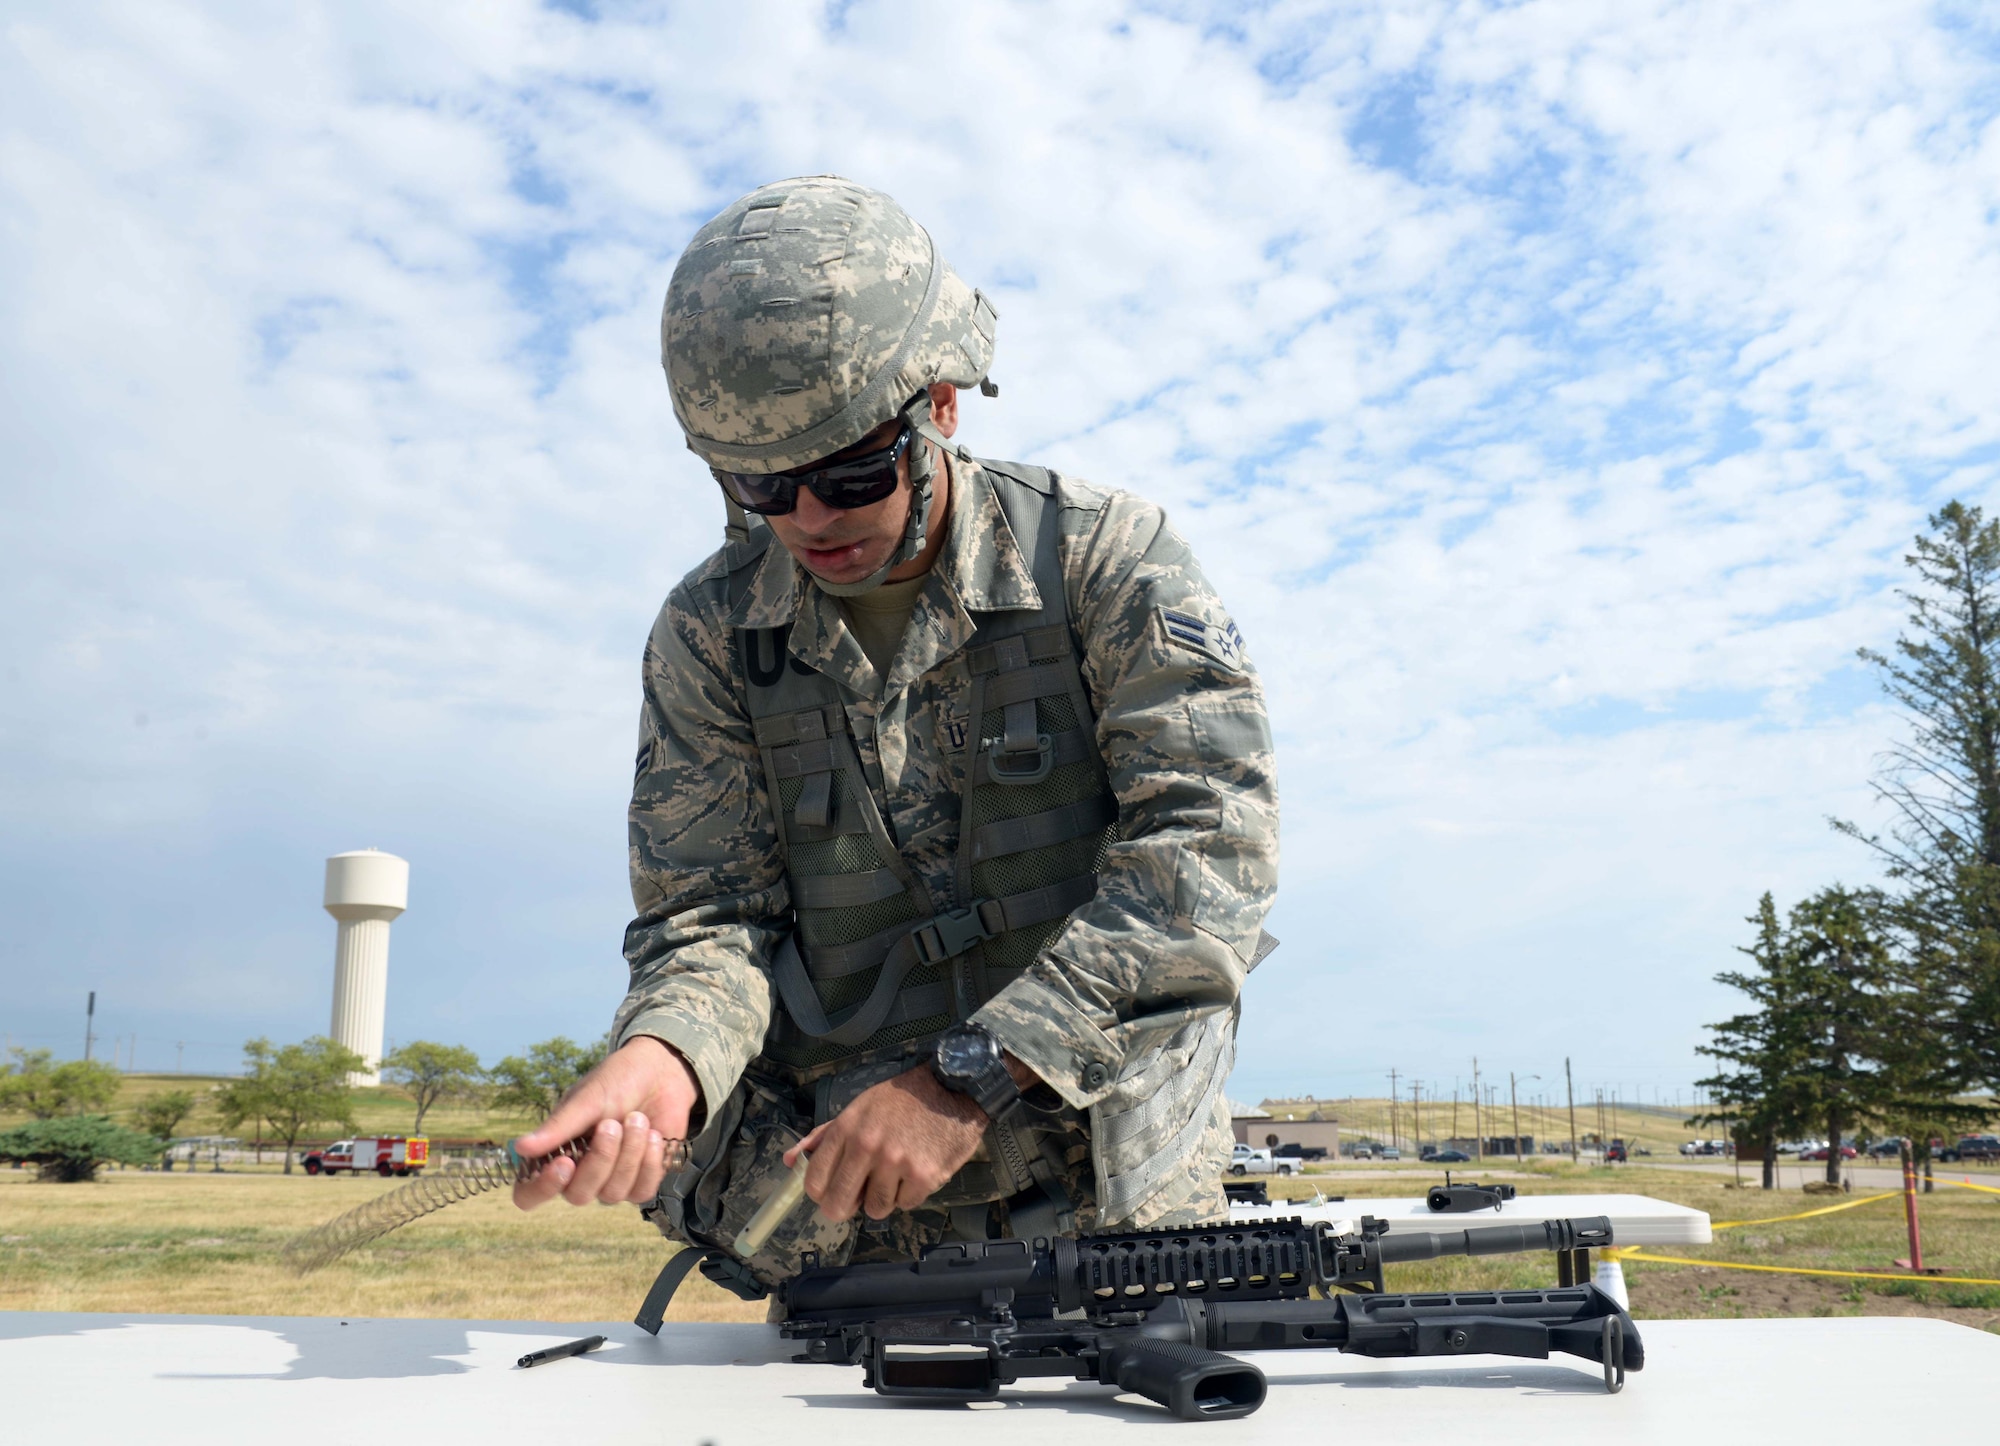 Airman 1st Class Joshua Torres, a power production apprentice assigned to the 28th Civil Engineer Squadron, disassembles an M4 during the Prime Base Engineer Emergency Force (BEEF) challenge at Ellsworth Air Force Base, S.D., July 22, 2016. During the M4 relay, an Airman runs down to field-strip an M4, then tags another Airman who then runs back to the M4 to reassemble and function check the weapon. (U.S. Air Force photo by Airman Donald Knechtel) 